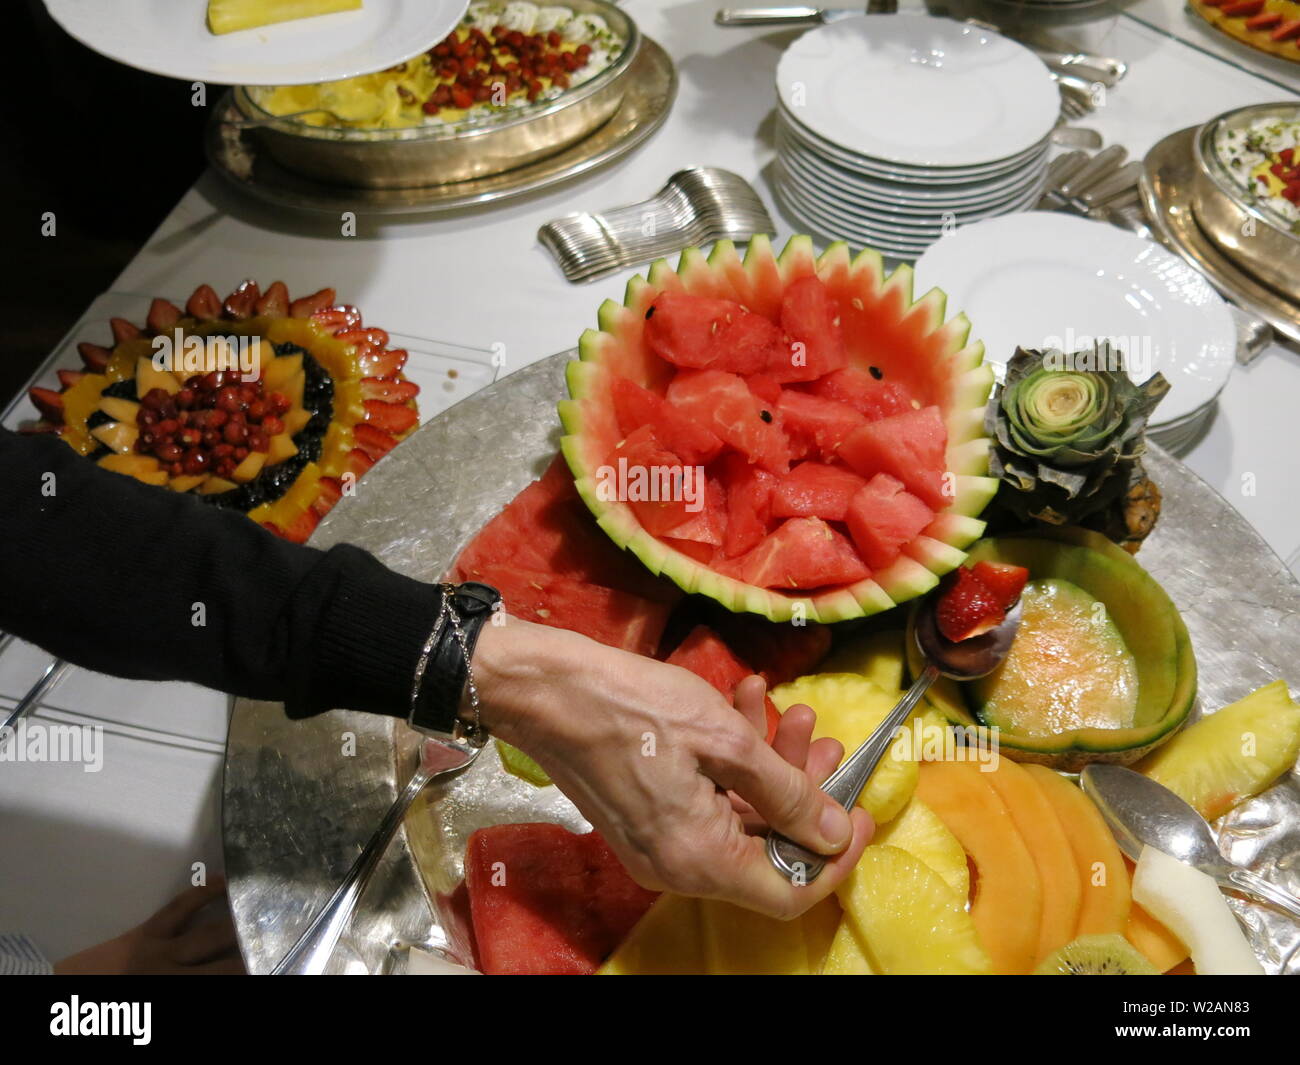 A woman's hand is holding a spoon to serve strawberries from an array of desserts and platters of fresh fruit on offer at an appetising buffet Stock Photo